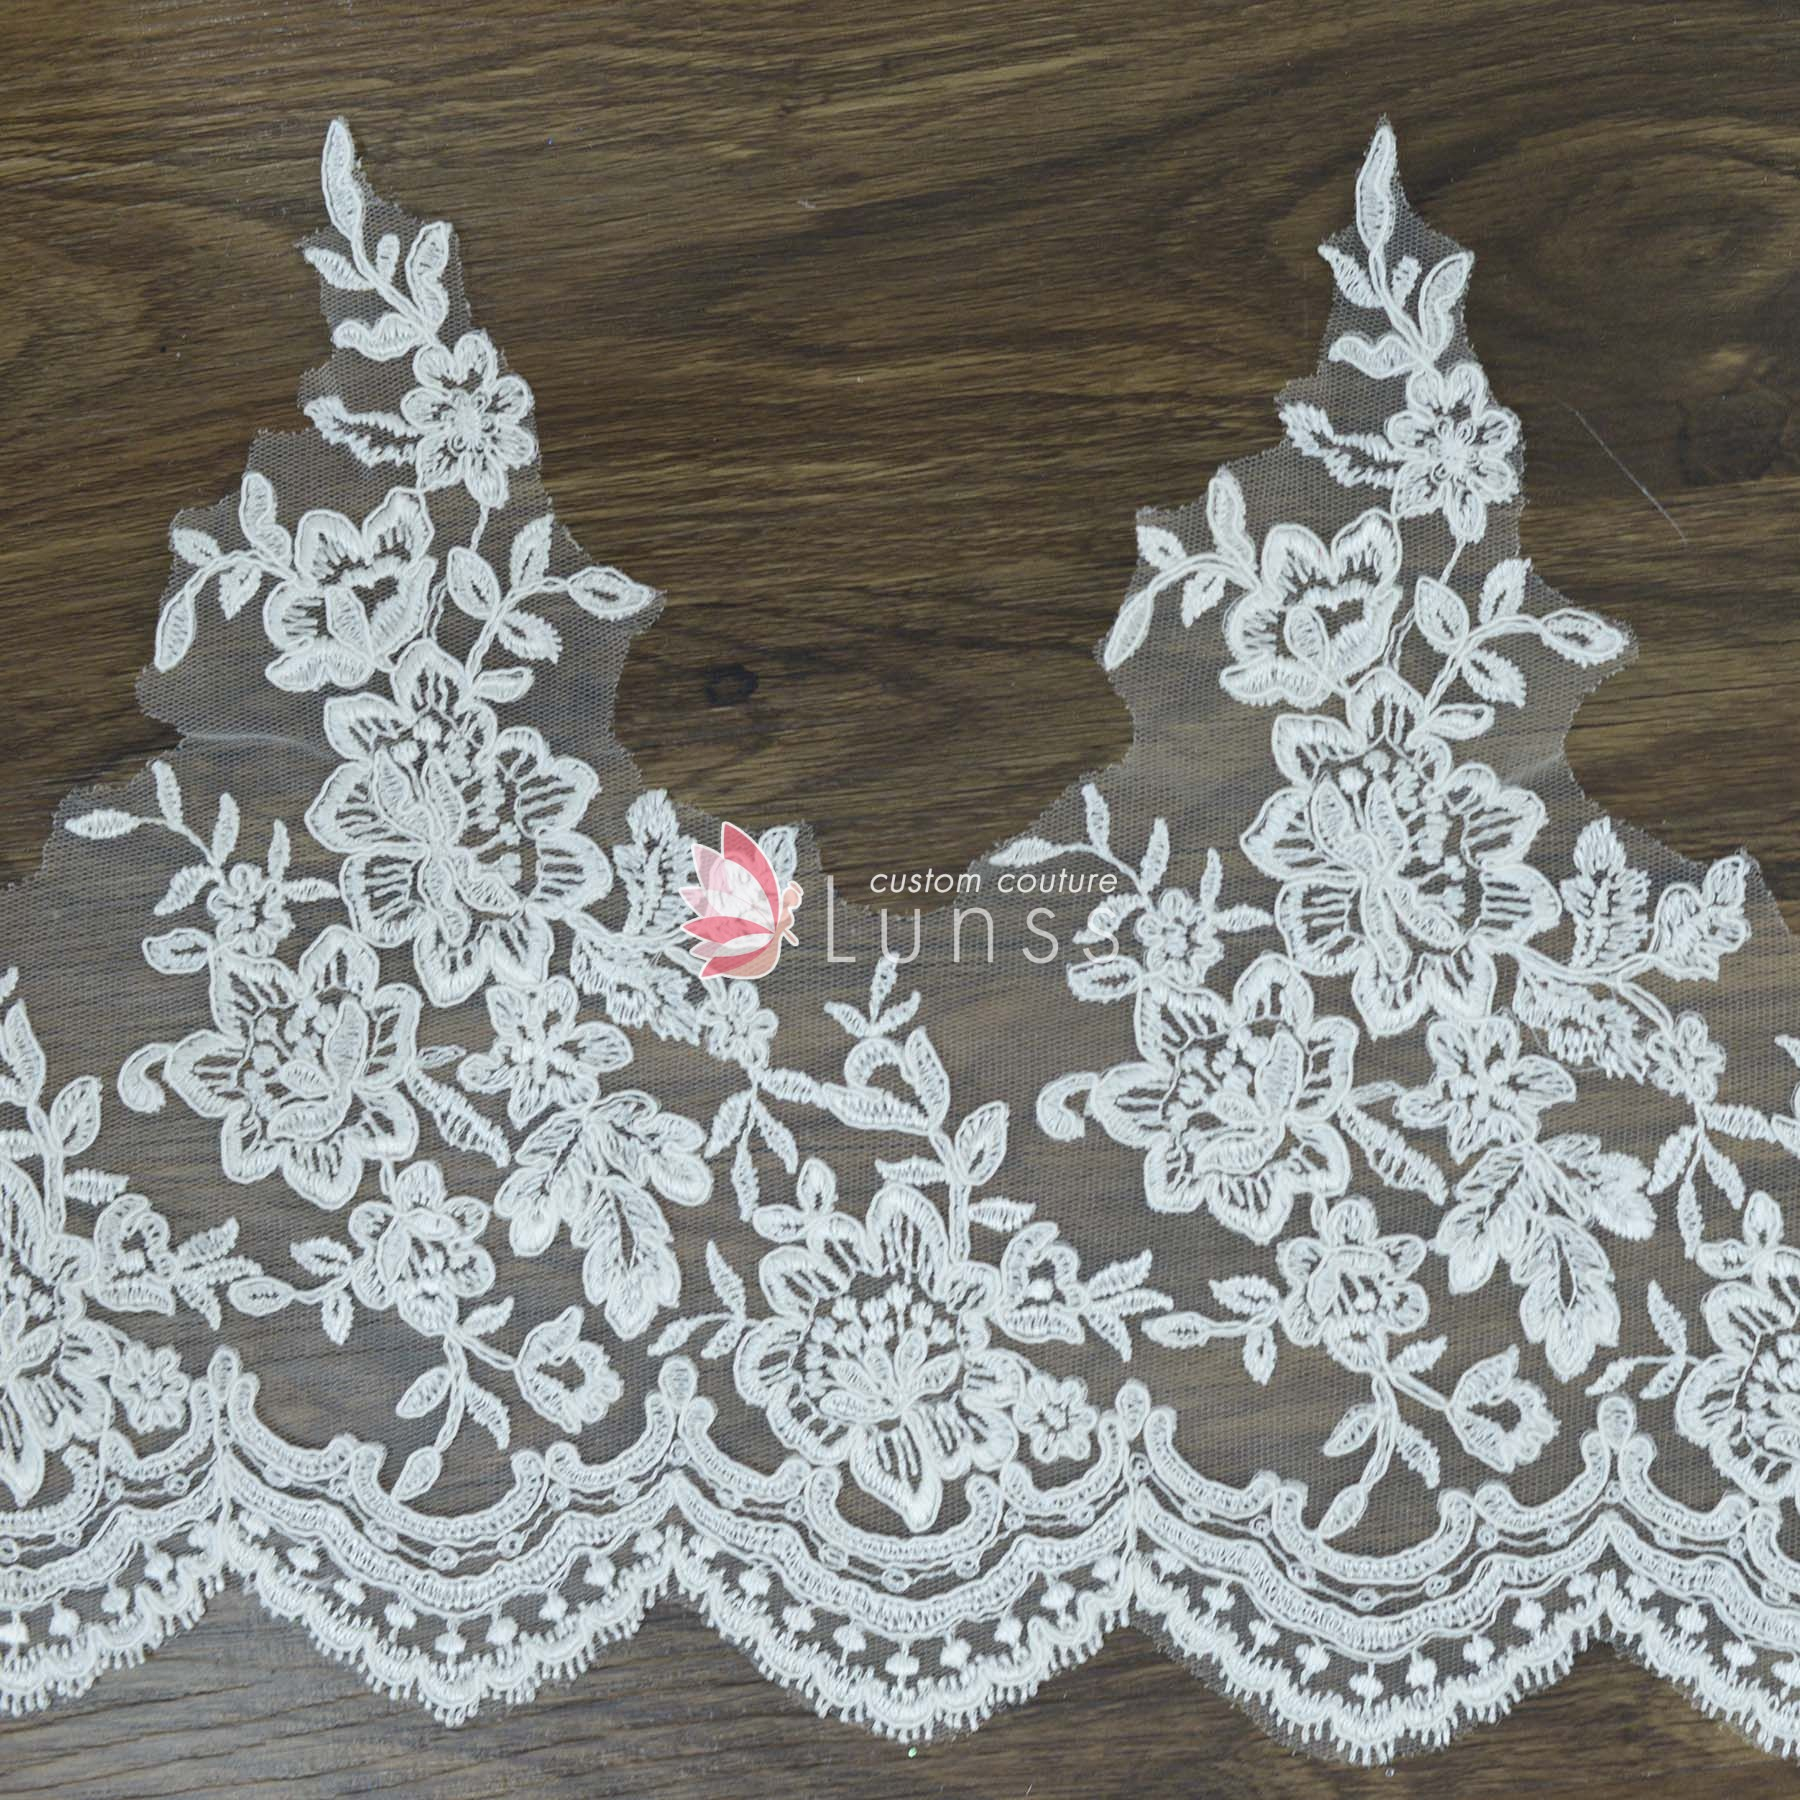 Wedding Dress Embroidery Patterns High Quality Ivory Wide Corded Embroidered Floral Bridal Lace Trim16 Yardspiece